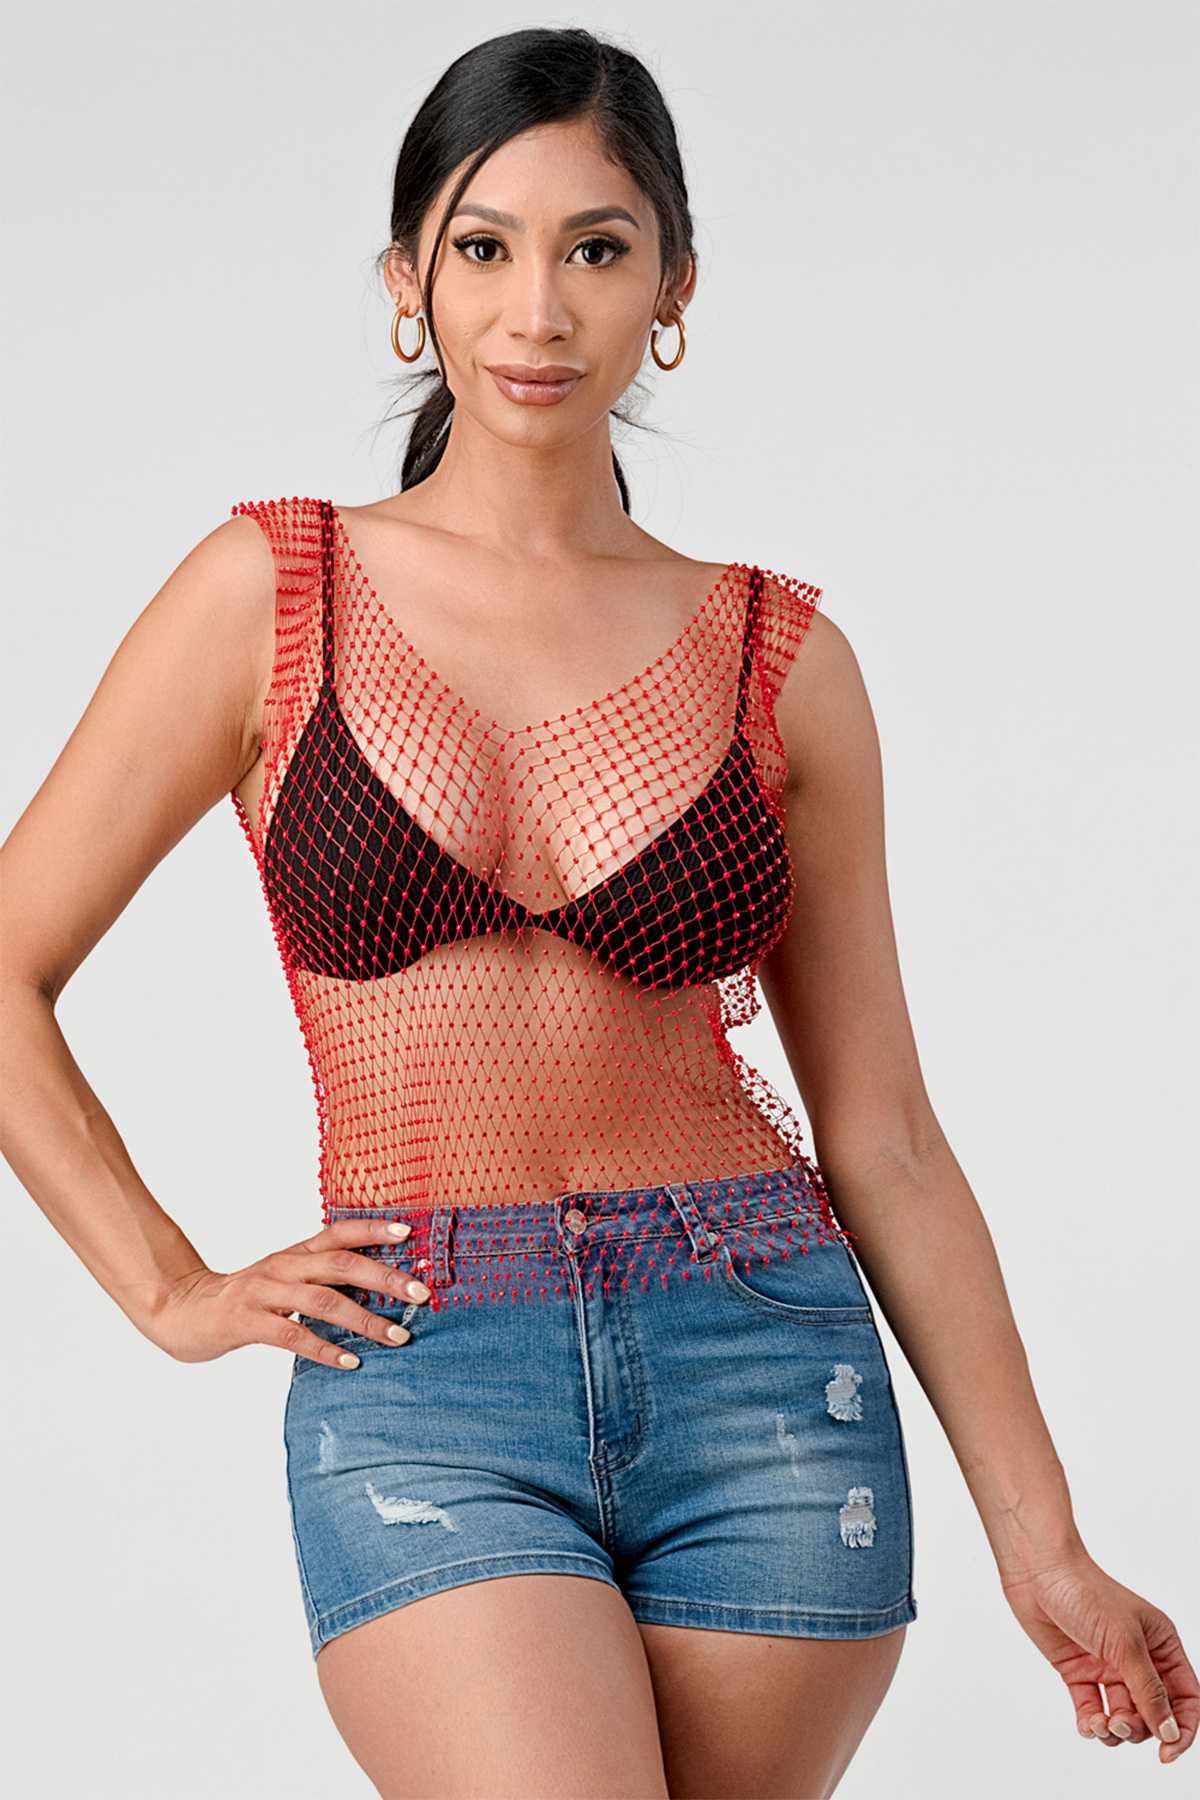 CRYSTAL BEADS AND FISHNET SEAMLESS STRECH CROP TOP